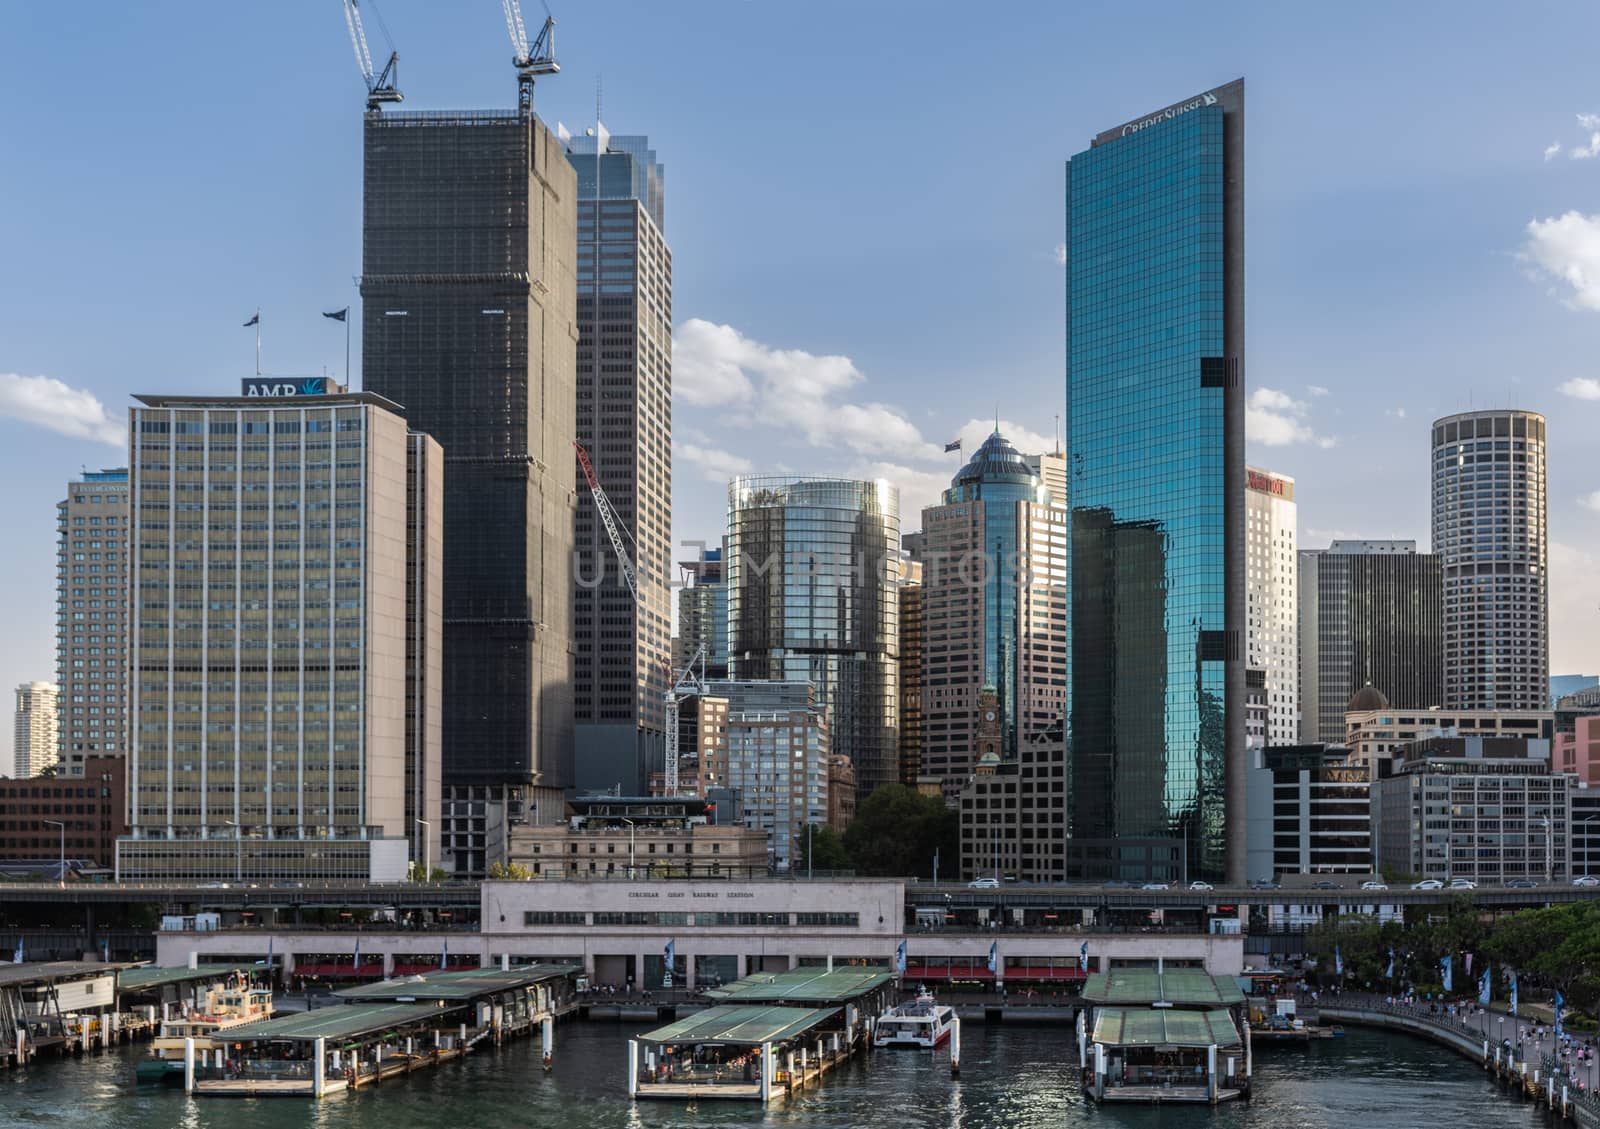 Part of Ferry terminal and Circular Quay Railway station, Sydney by Claudine